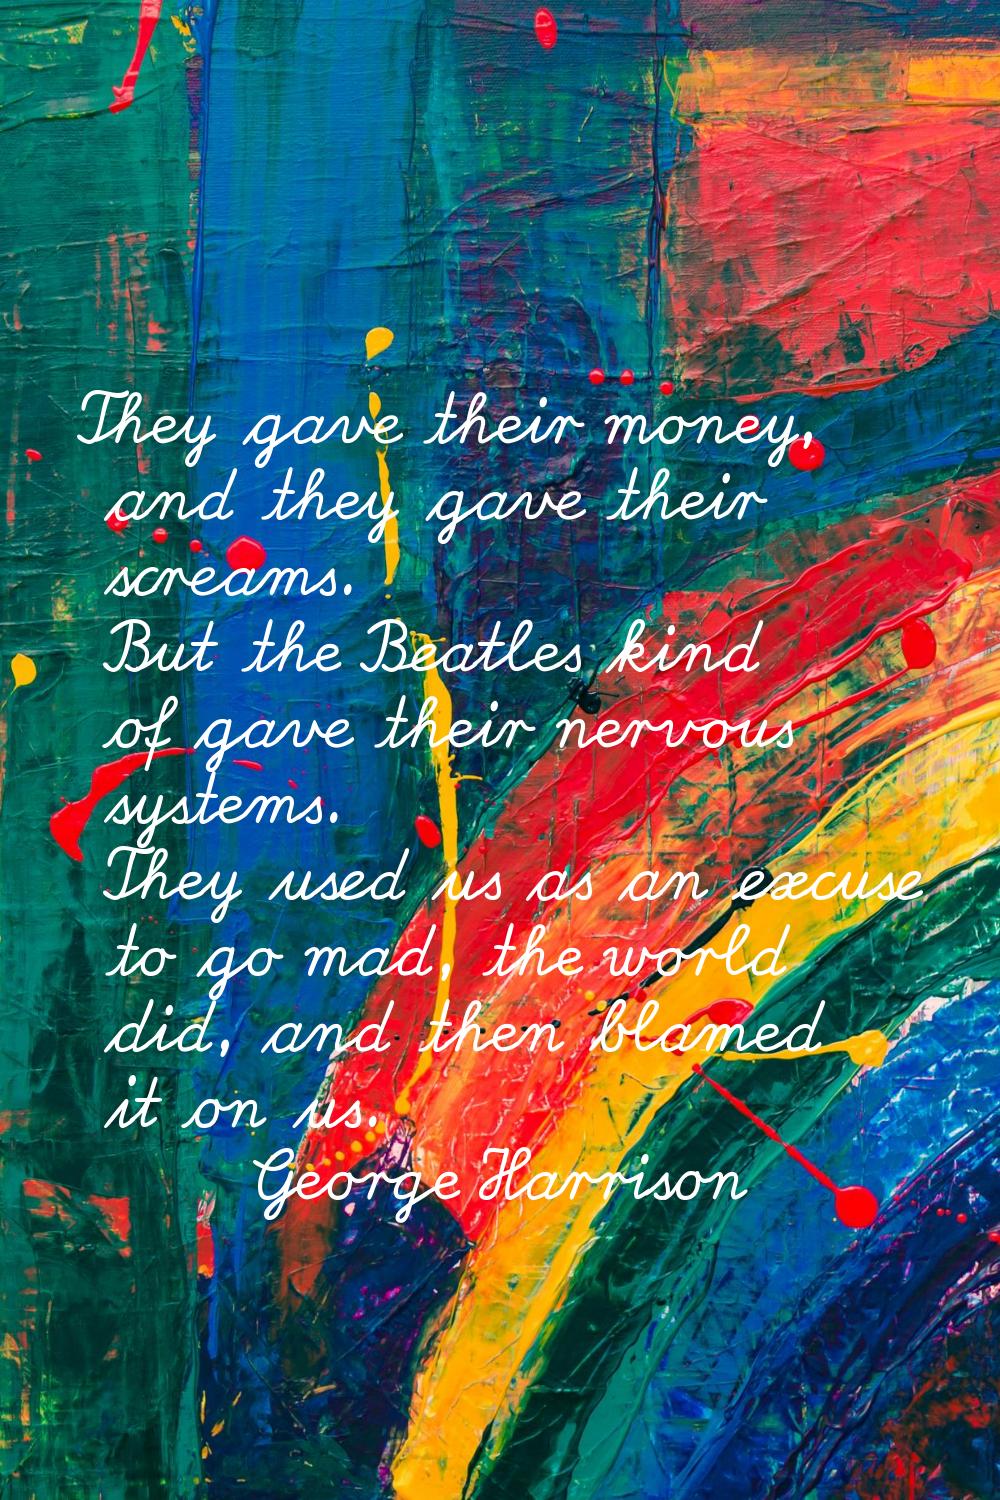 They gave their money, and they gave their screams. But the Beatles kind of gave their nervous syst